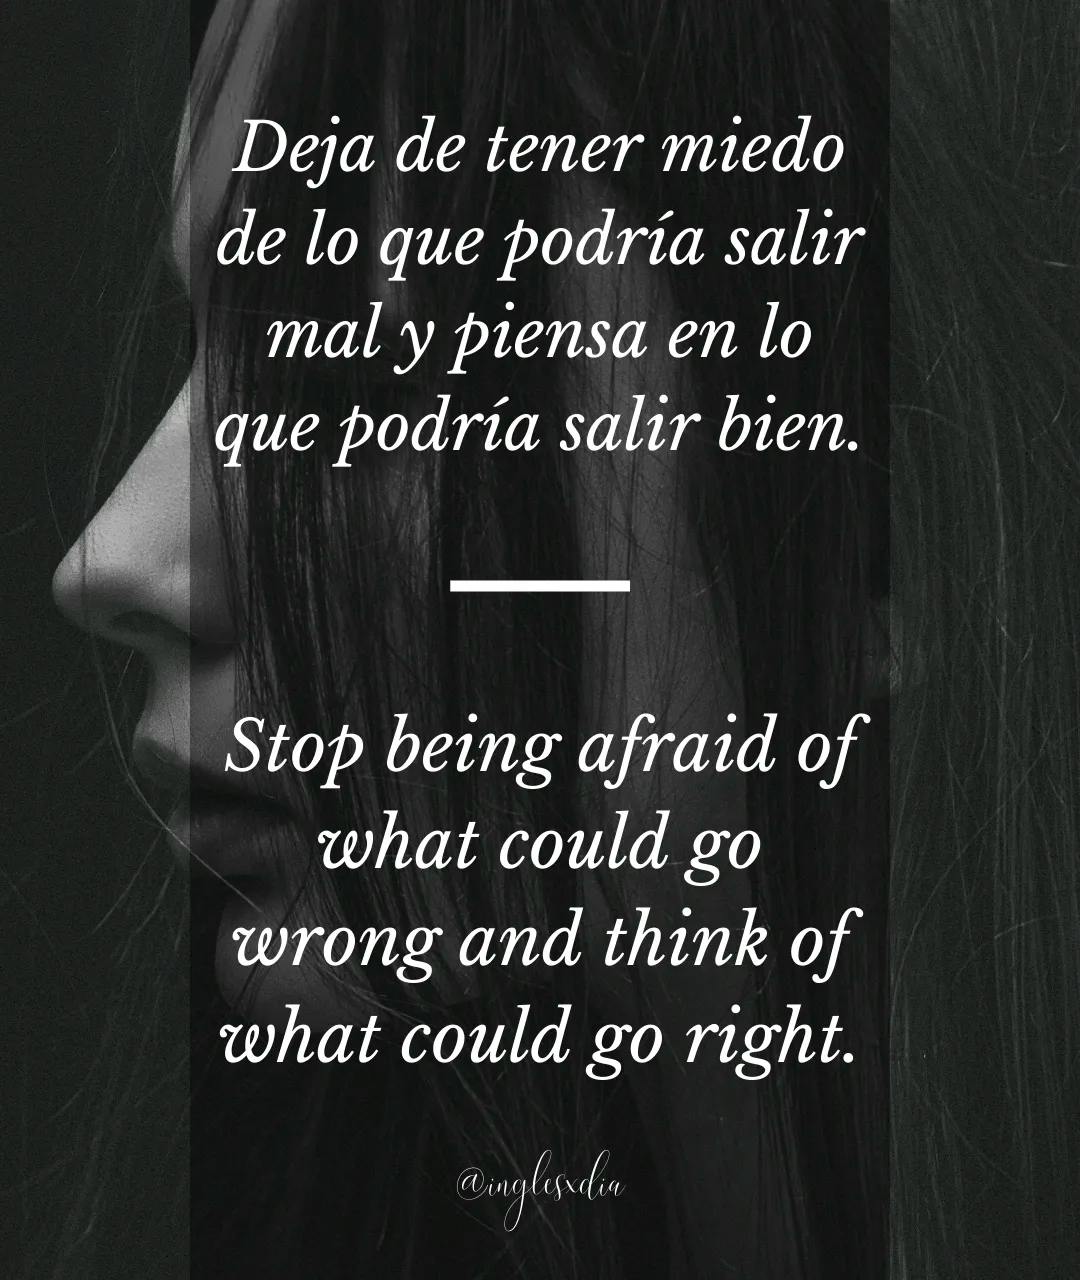 Frases motivadoras en inglés: Stop being afraid of what could go wrong and think of what could go right.